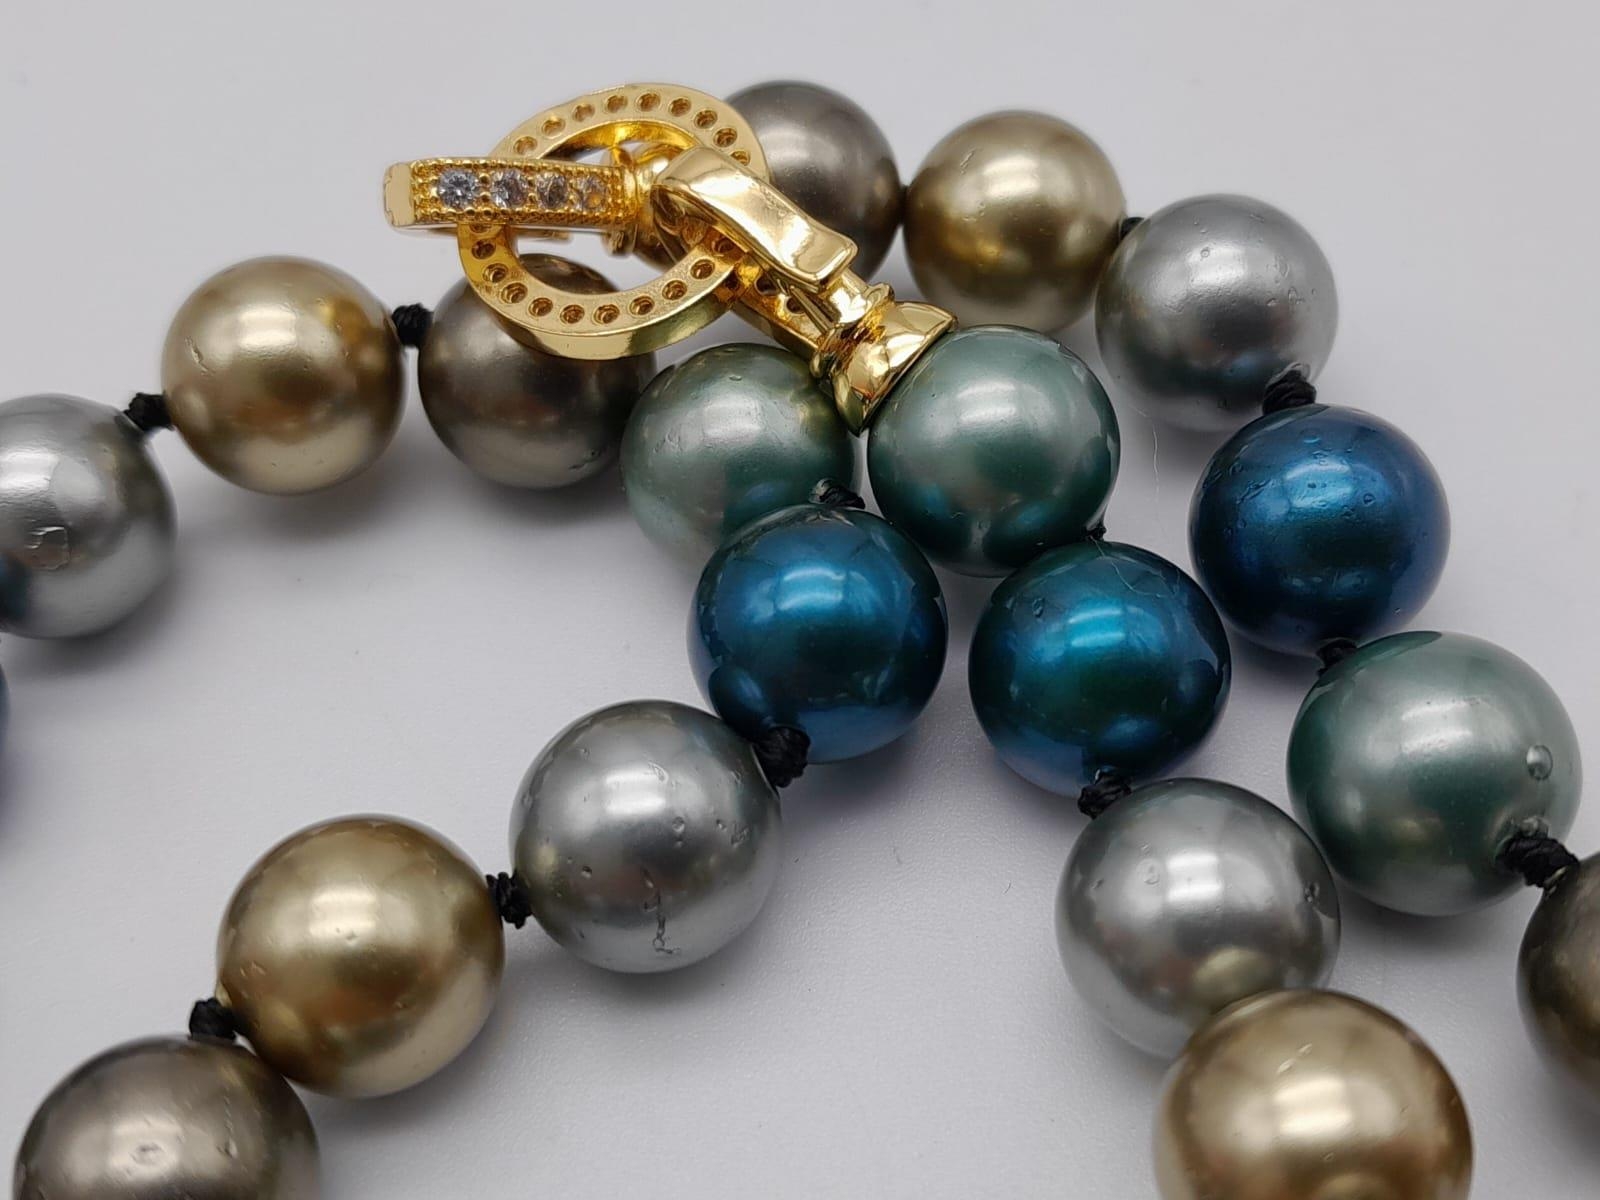 A Multi-Coloured South Sea Pearl Shell Bead Necklace. Gilded, silver and blue beads -12mm. 48cm. - Image 3 of 3